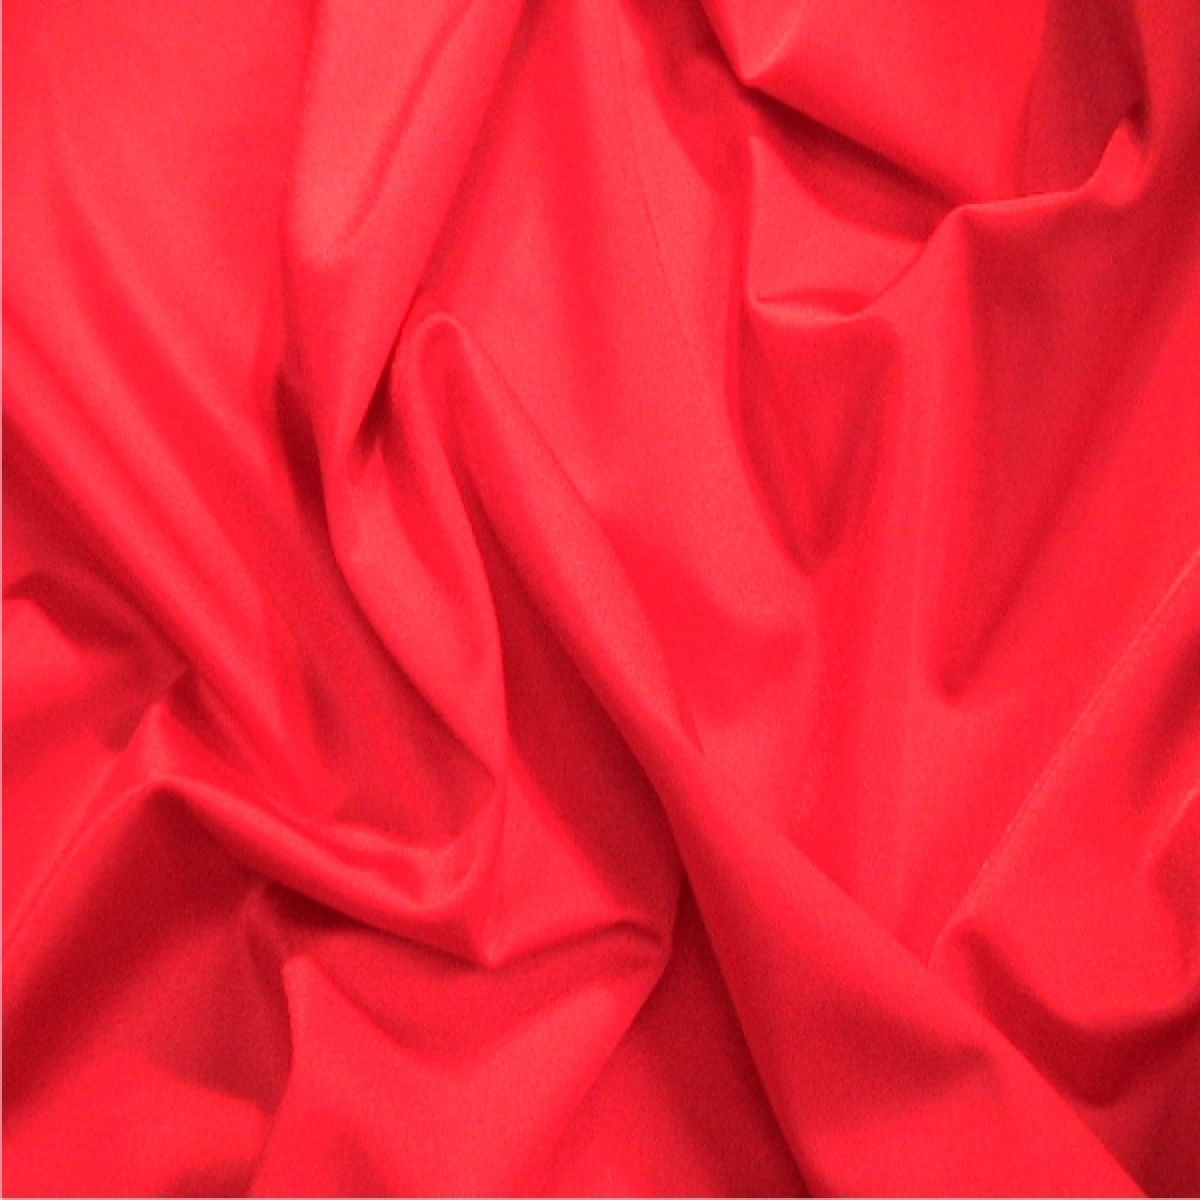  Discount Fabric Polyester Spandex 4 Way Stretch Red